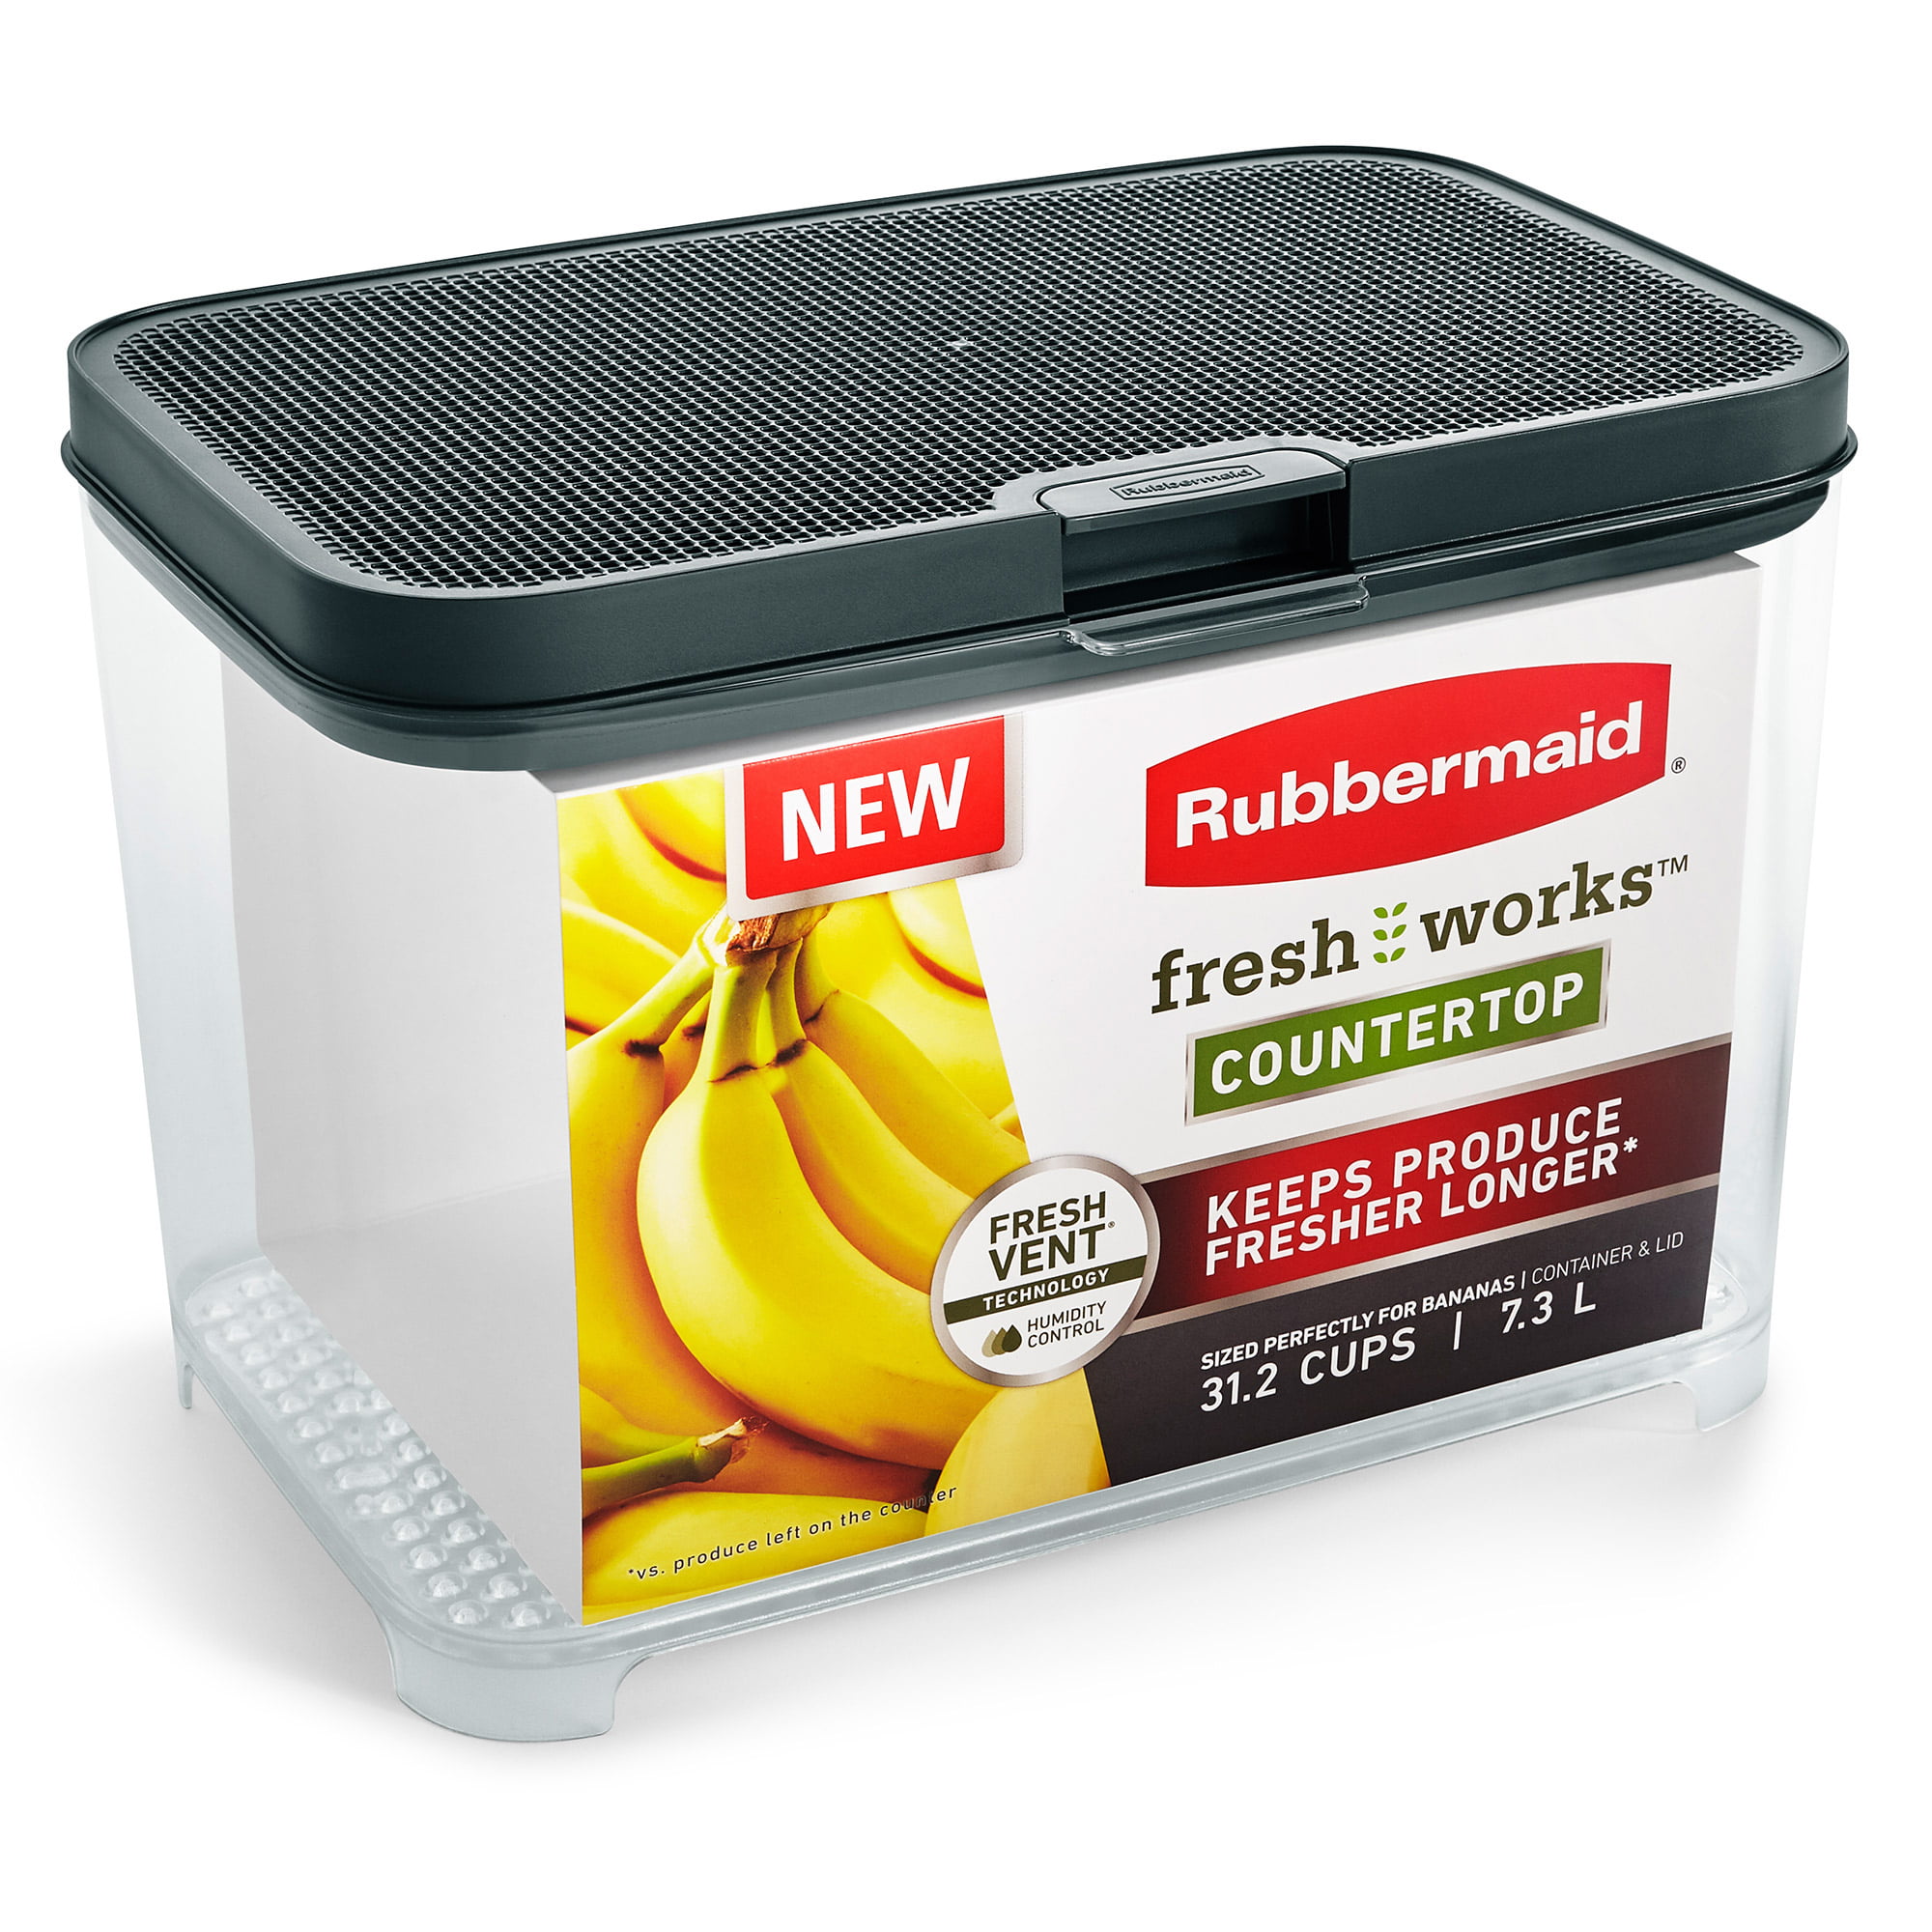 Rubbermaid® FreshWorks Medium Produce Saver Container - Green, 7.2